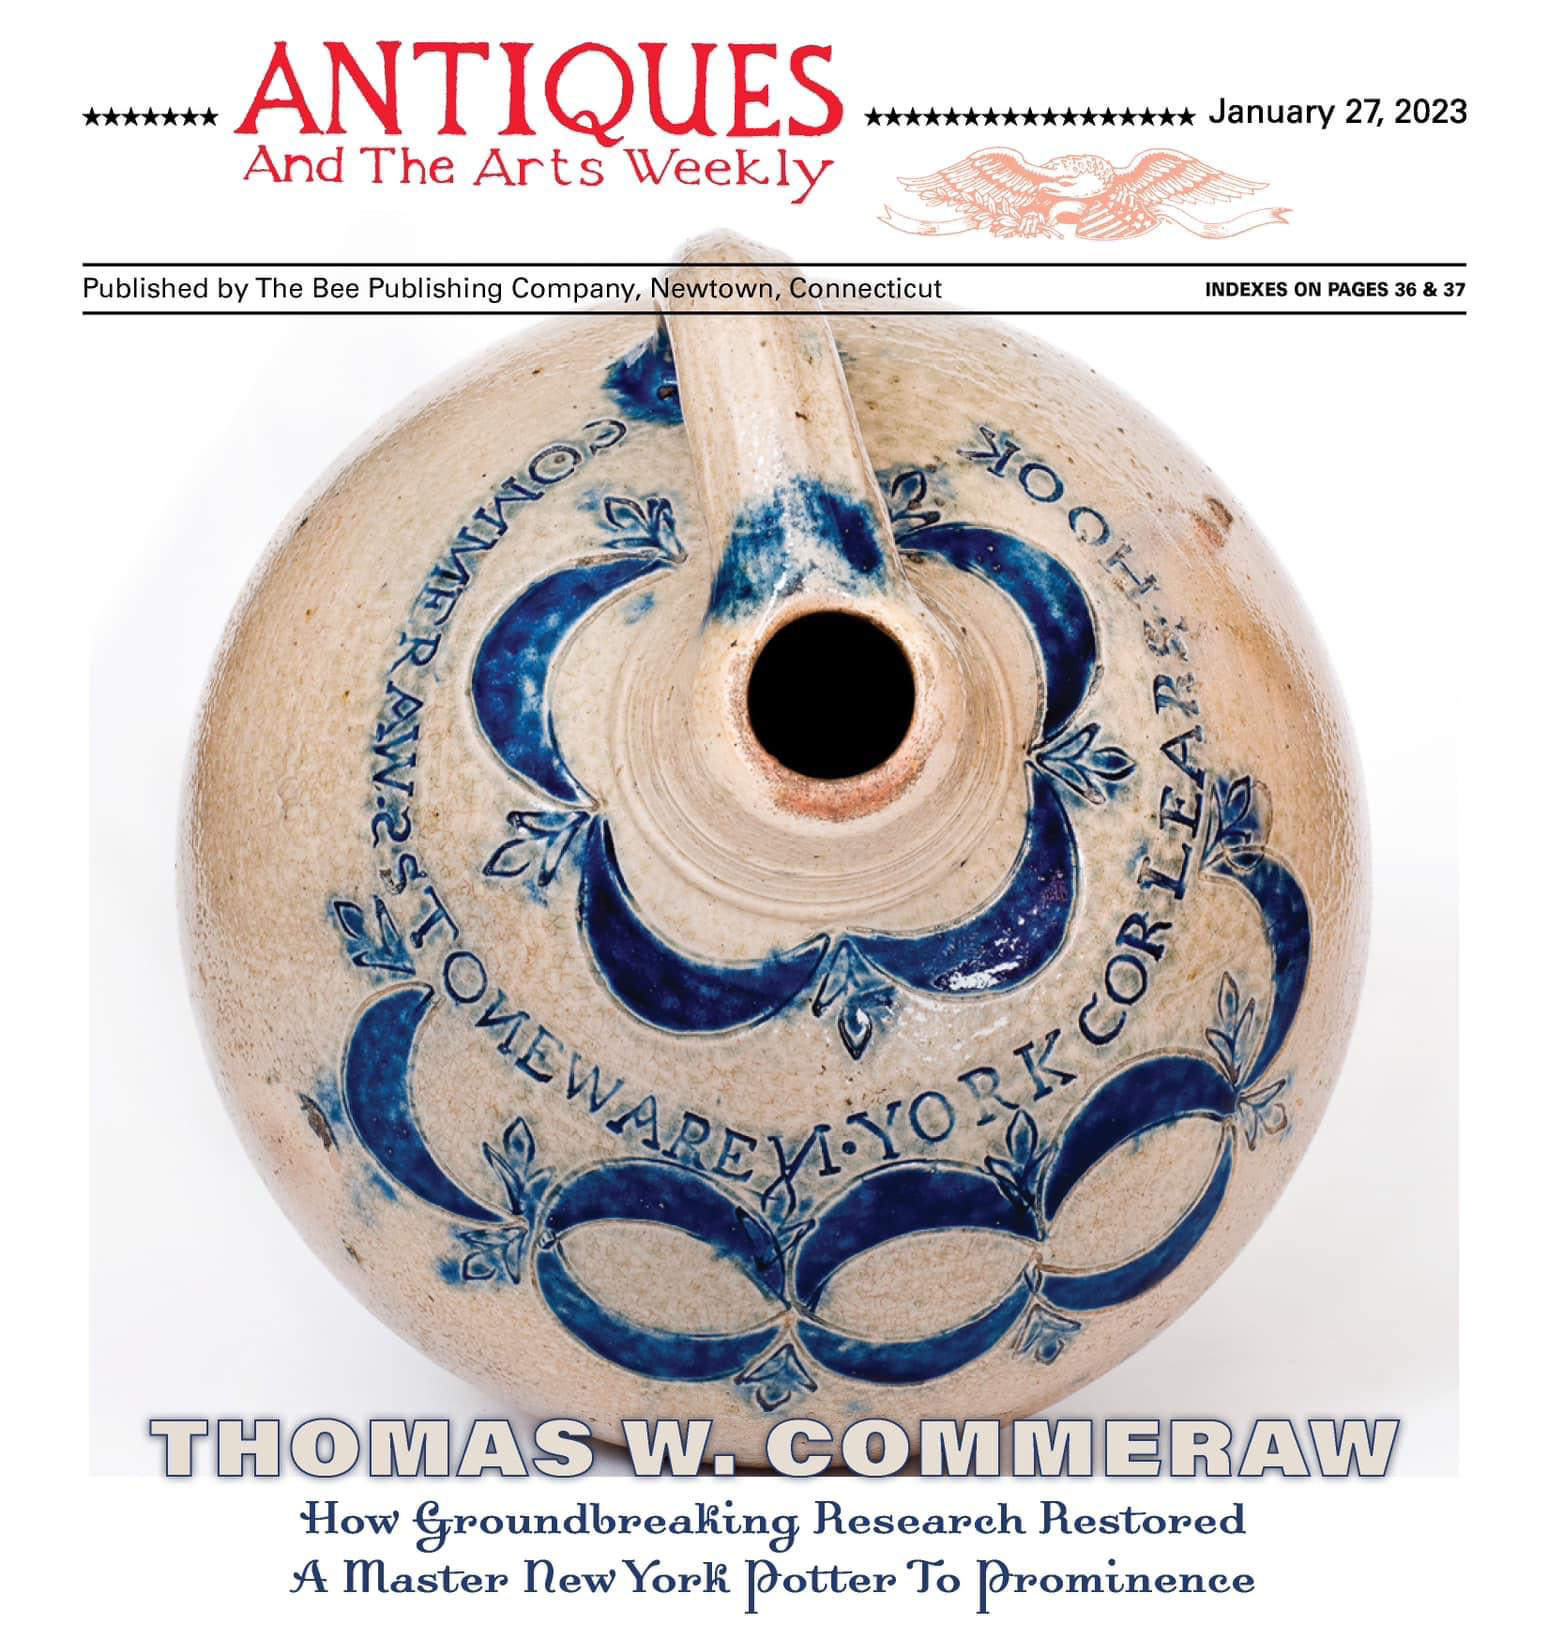 Commeraw cover story in Antiques & the Arts Weekly.